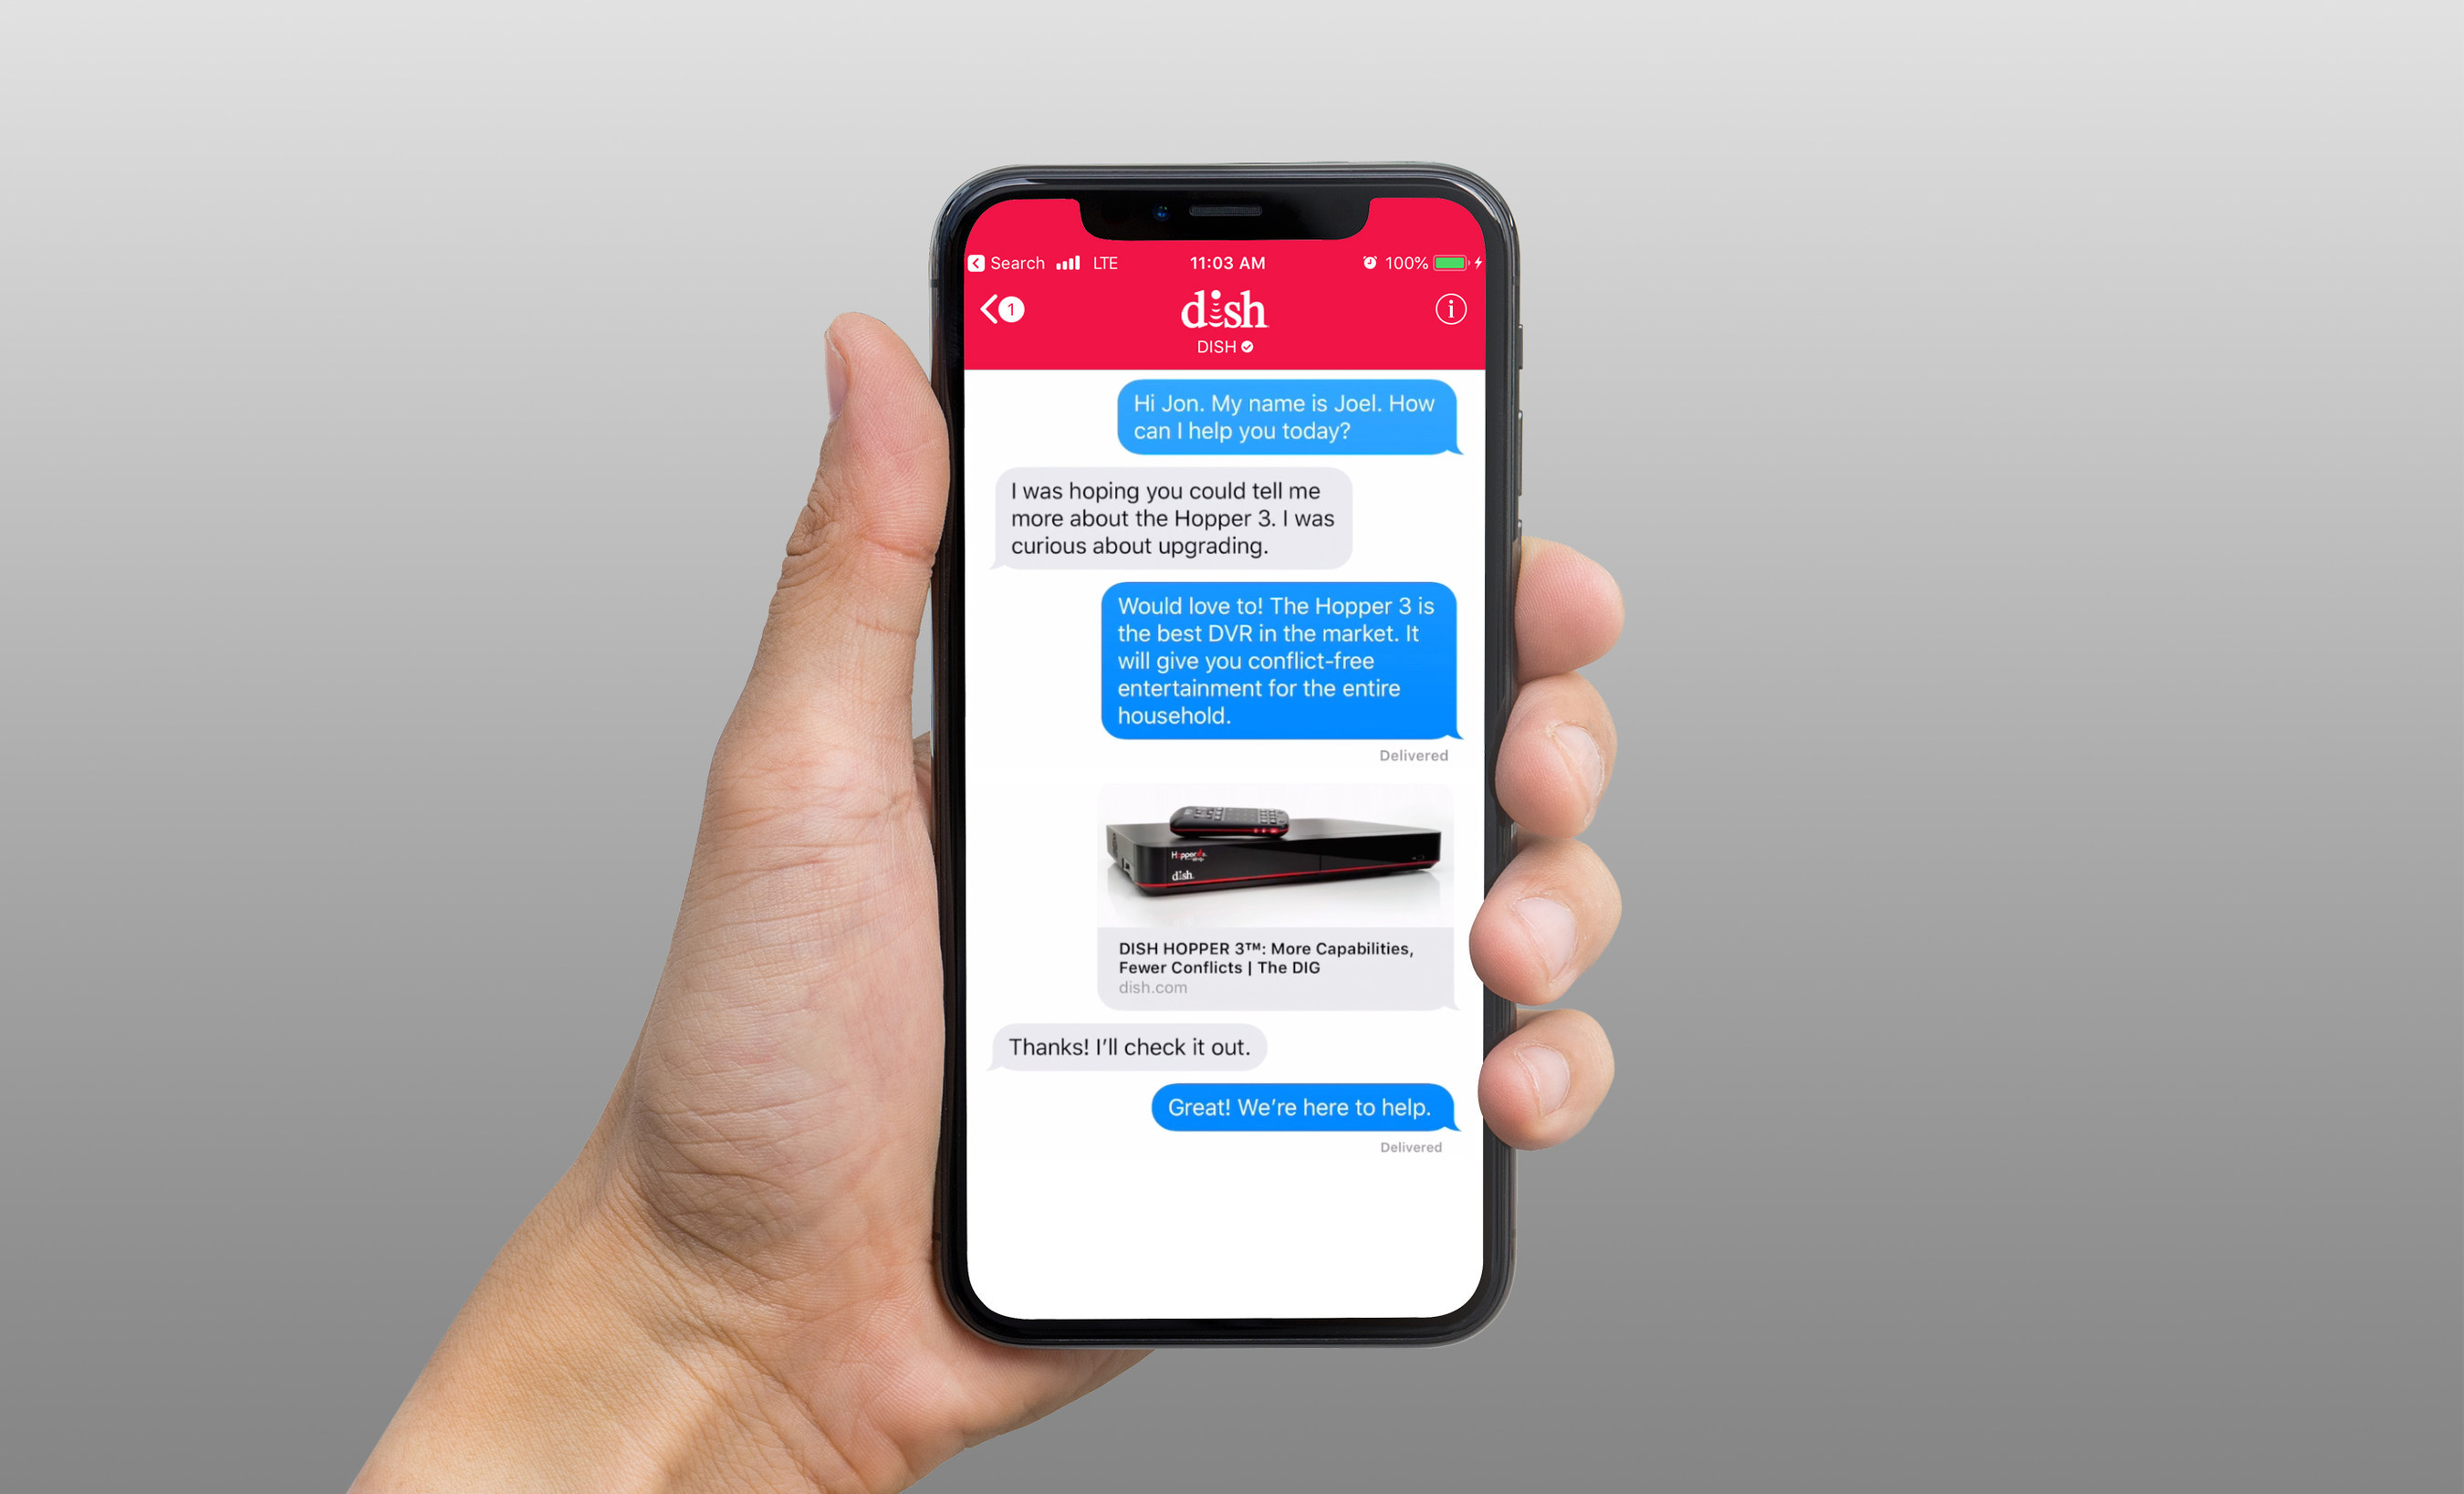 DISH adds Apple Messages to take the friction out of customer service